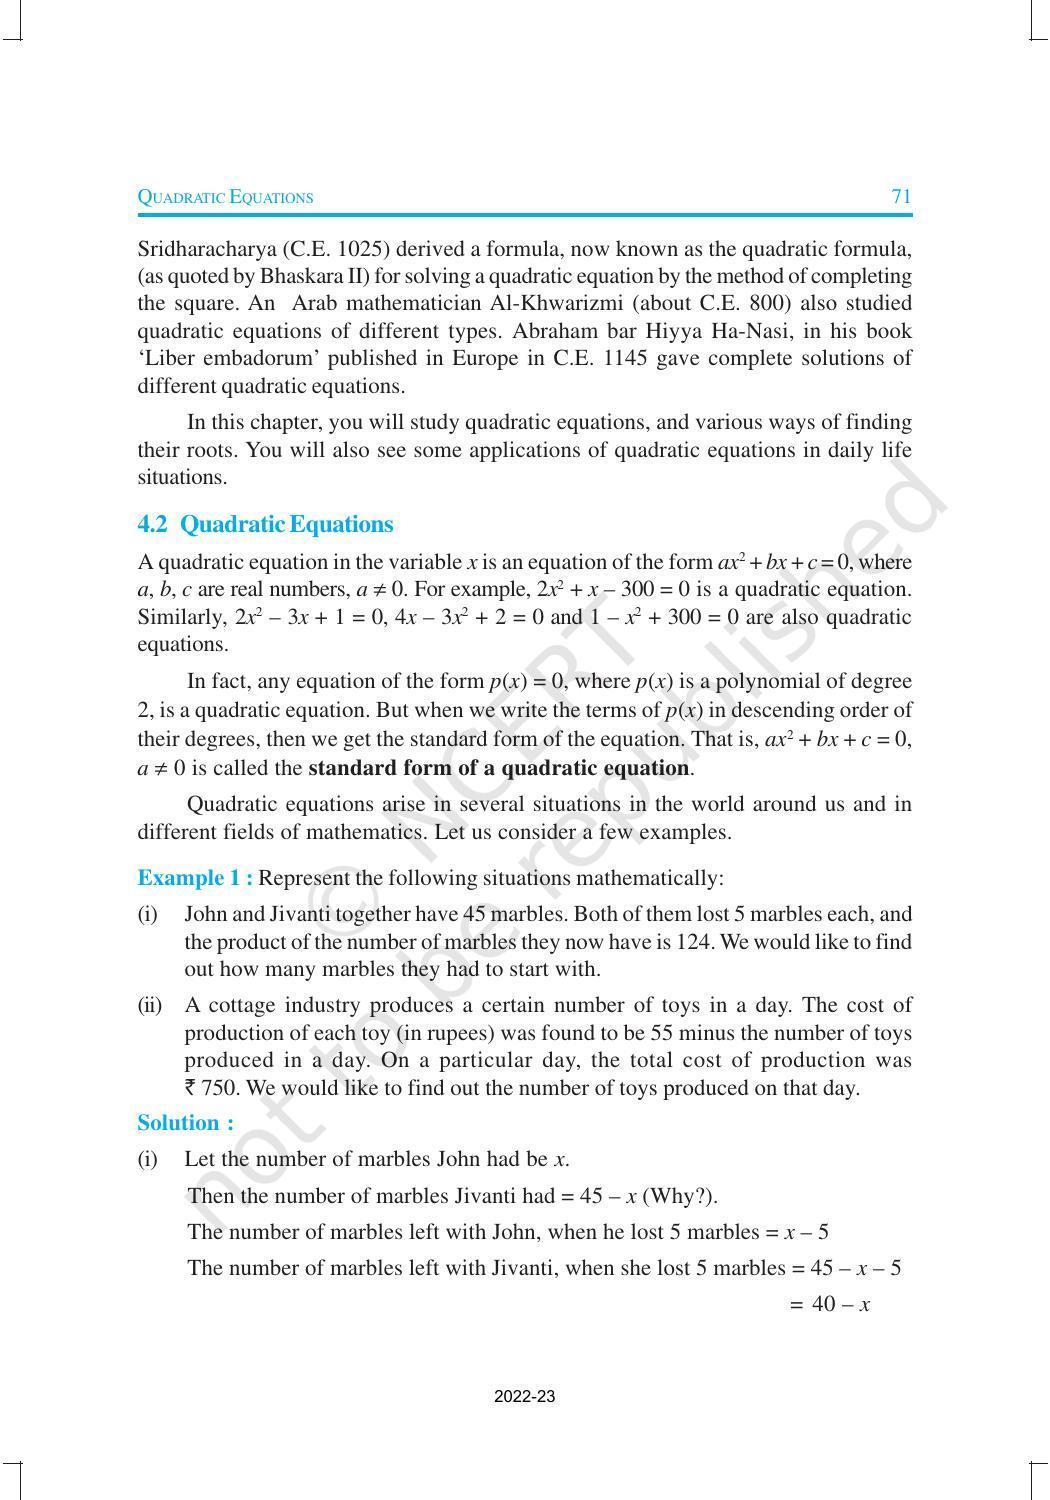 NCERT Book for Class 10 Maths Chapter 4 Quadratic Equations - Page 2